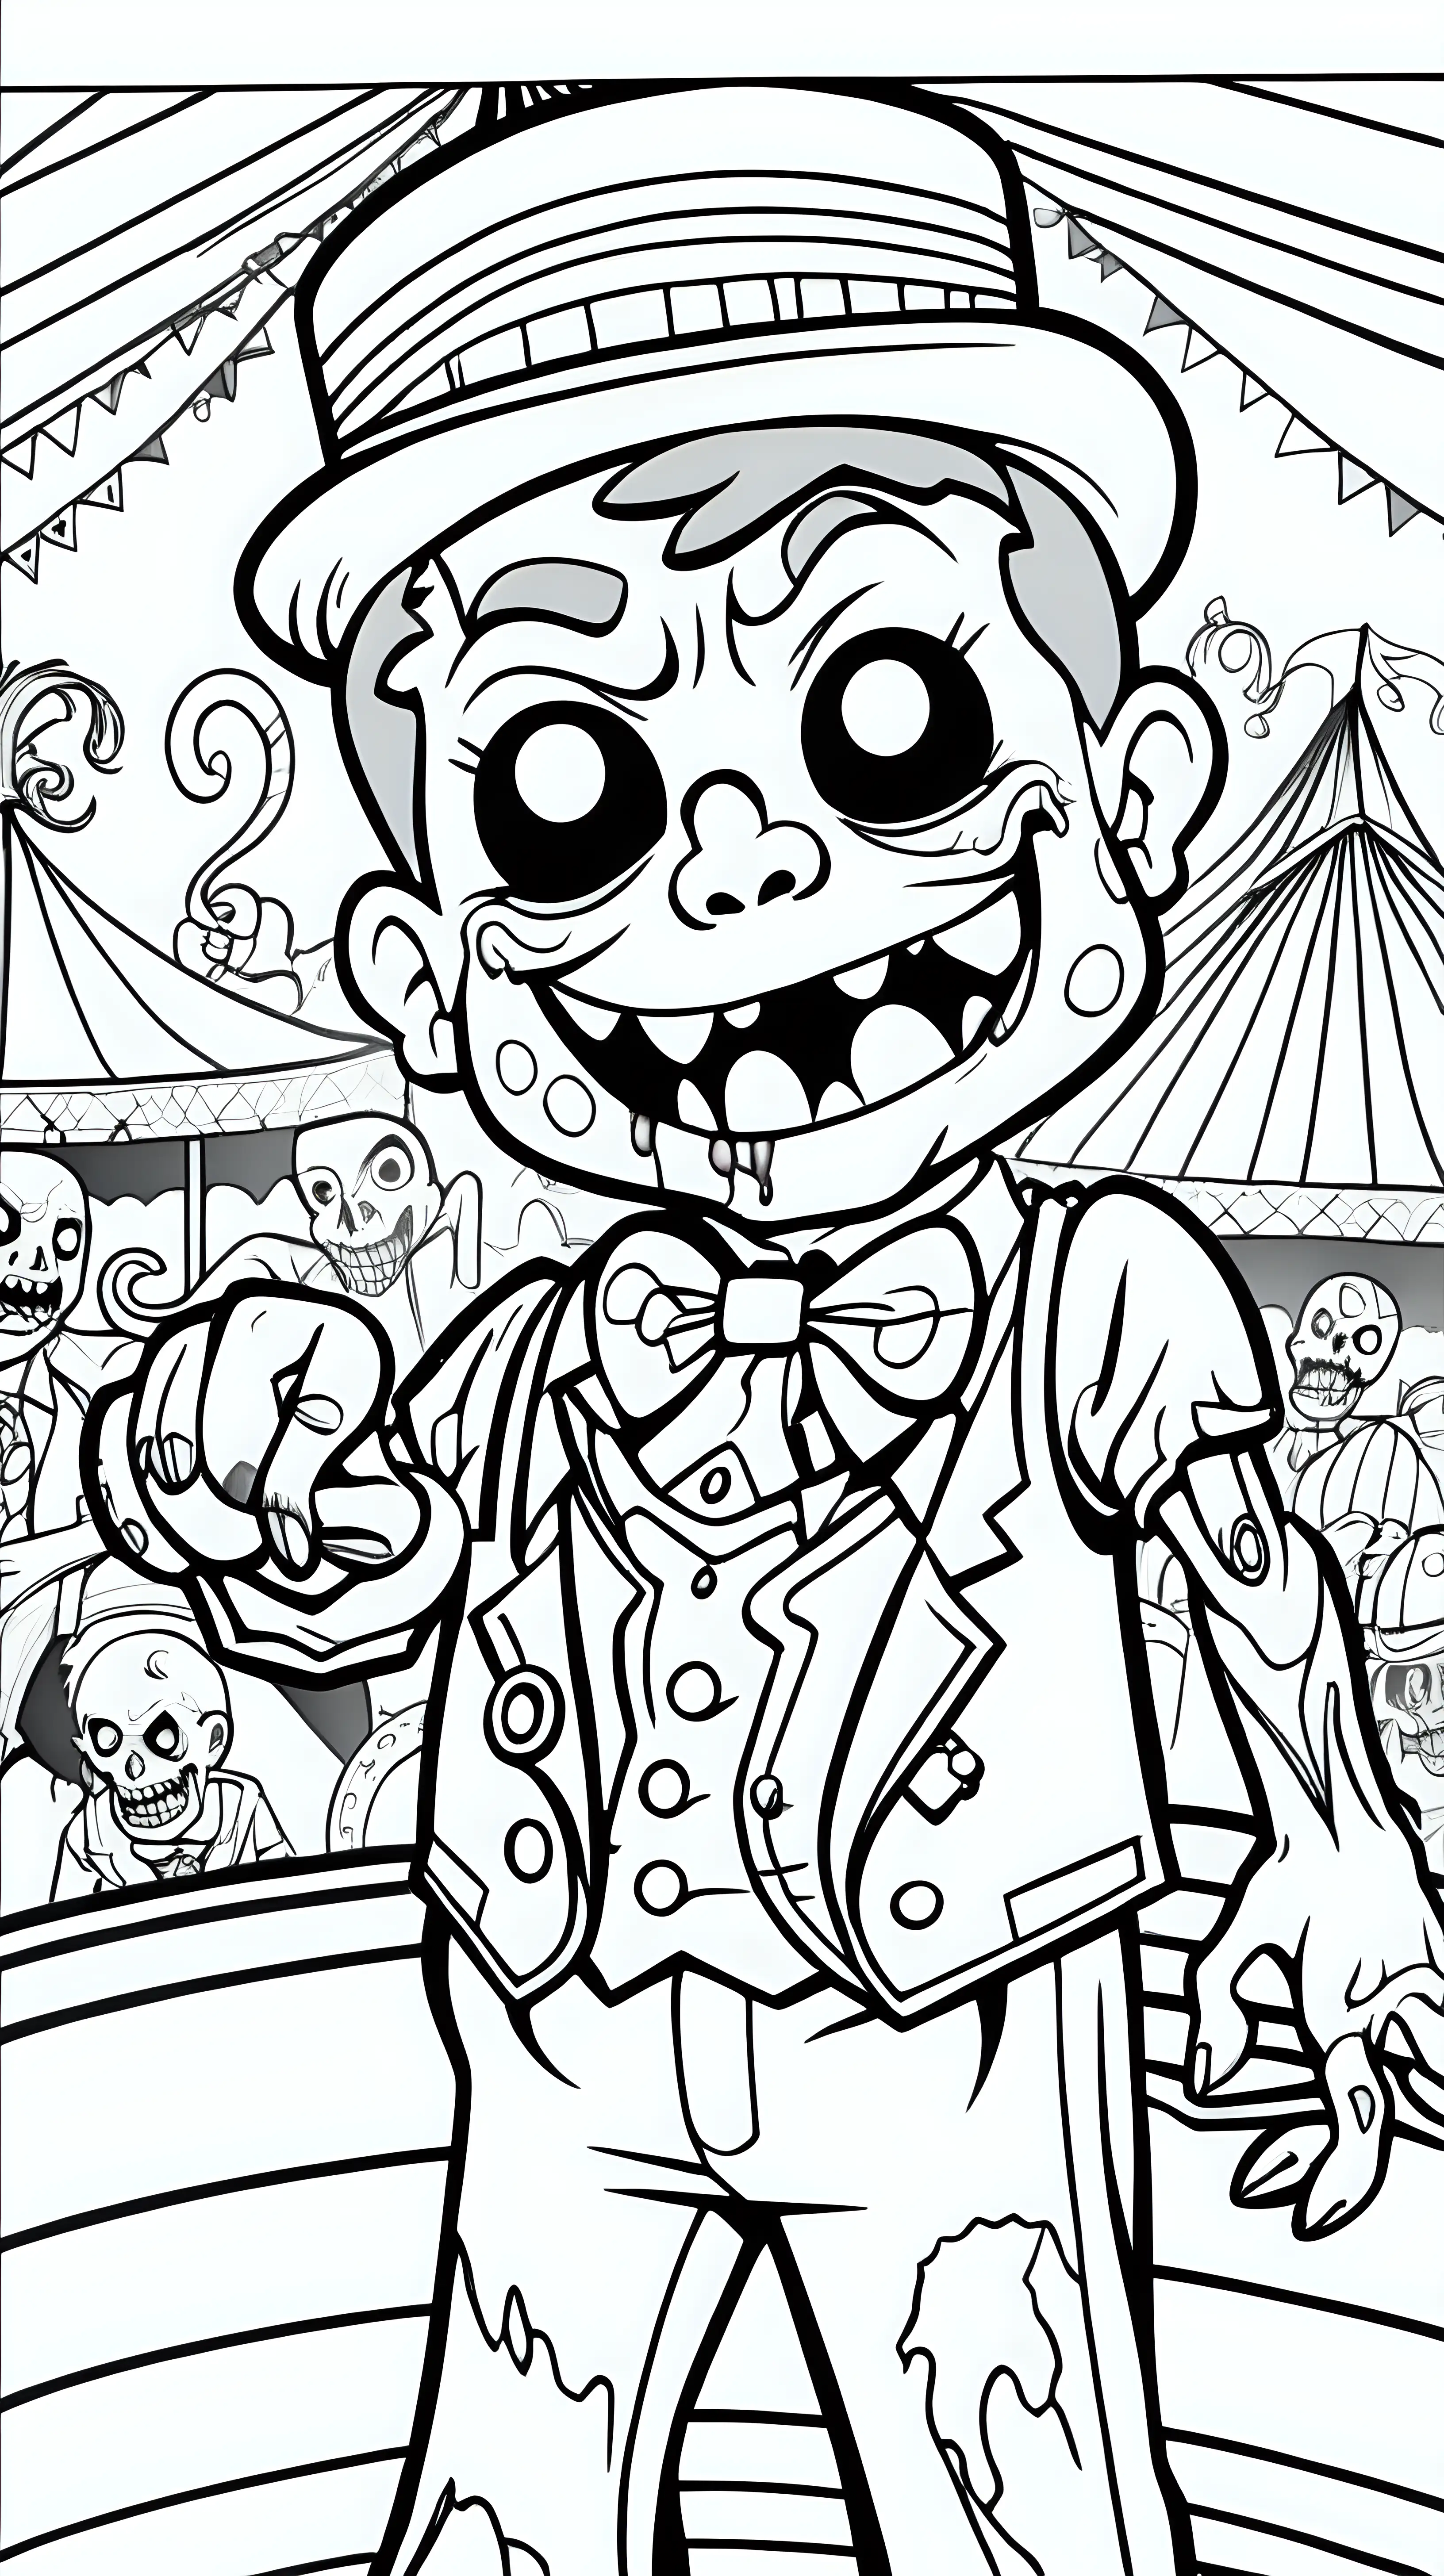 Friendly Zombie at Circus Playful Coloring Book Illustration